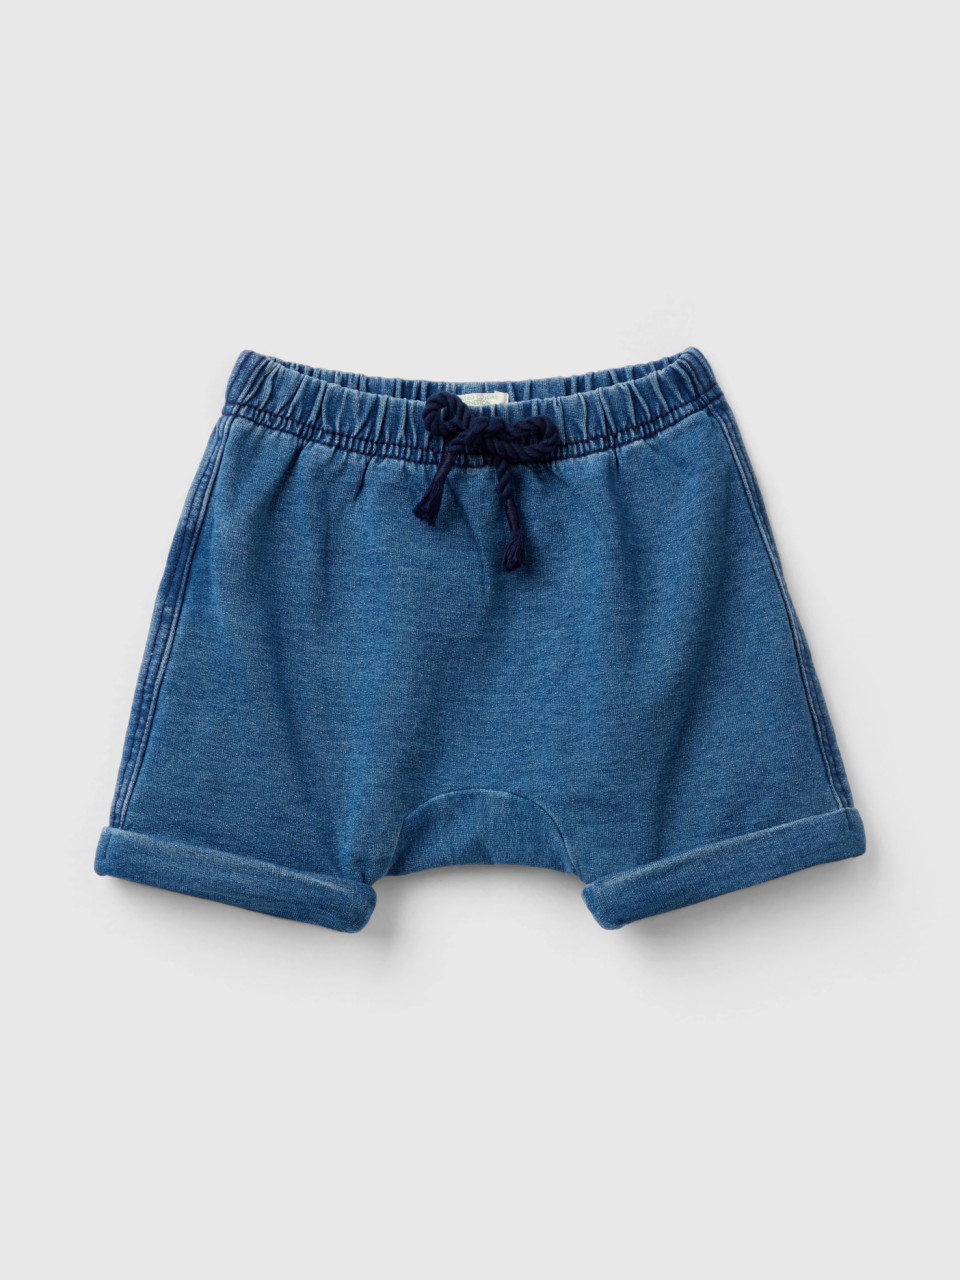 Benetton, Shorts With Denim Look Sweat Patch, Blue, Kids